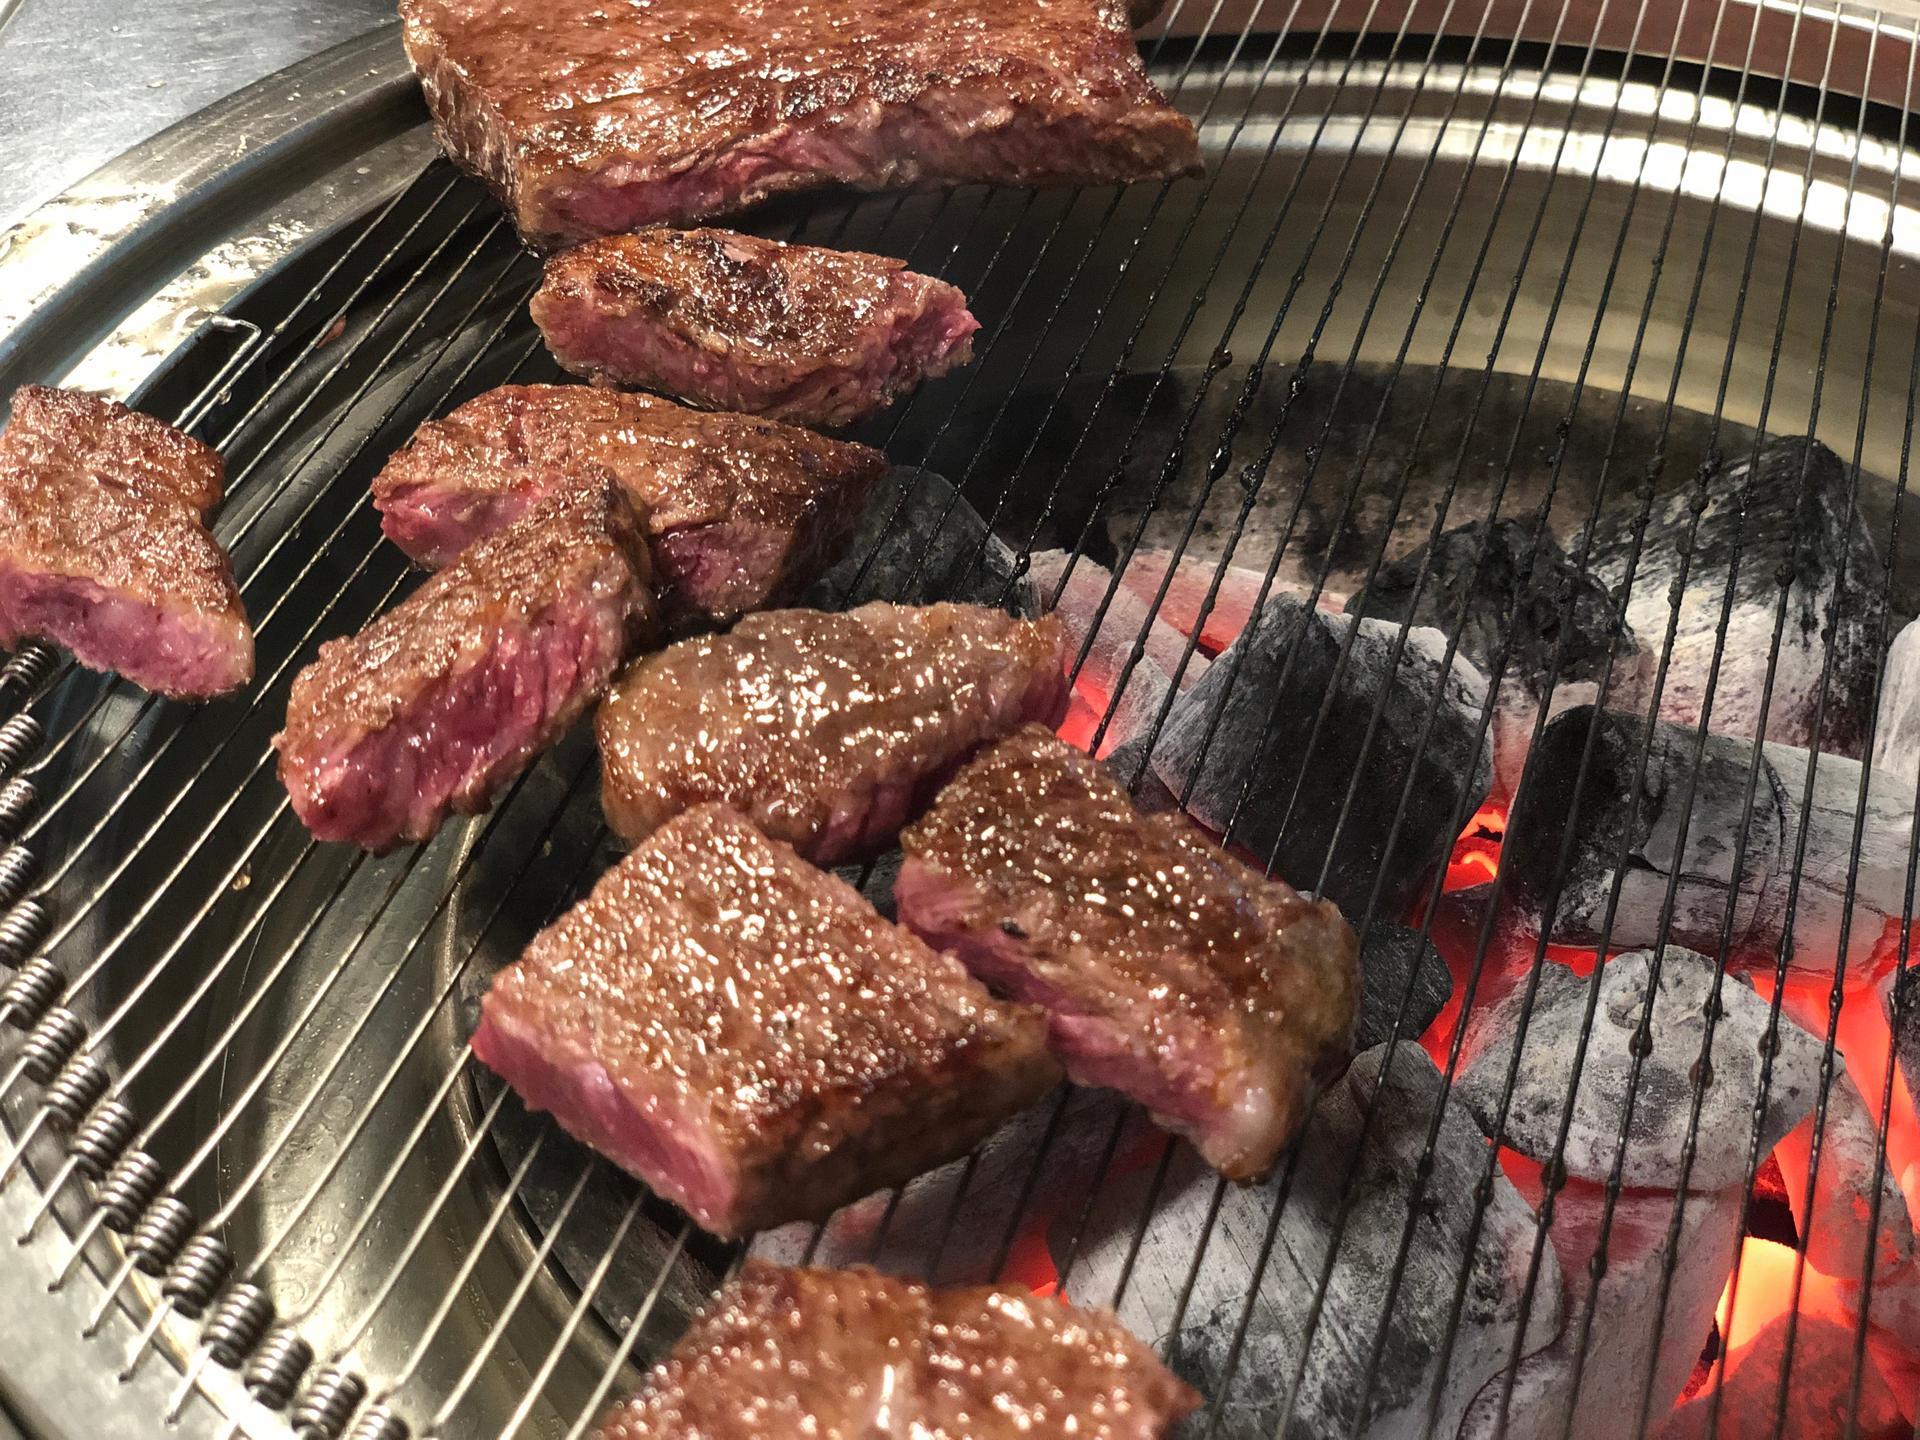 Grilled beef served on a grill. Delicious Korean dish with a recipe and kitchen appliances.